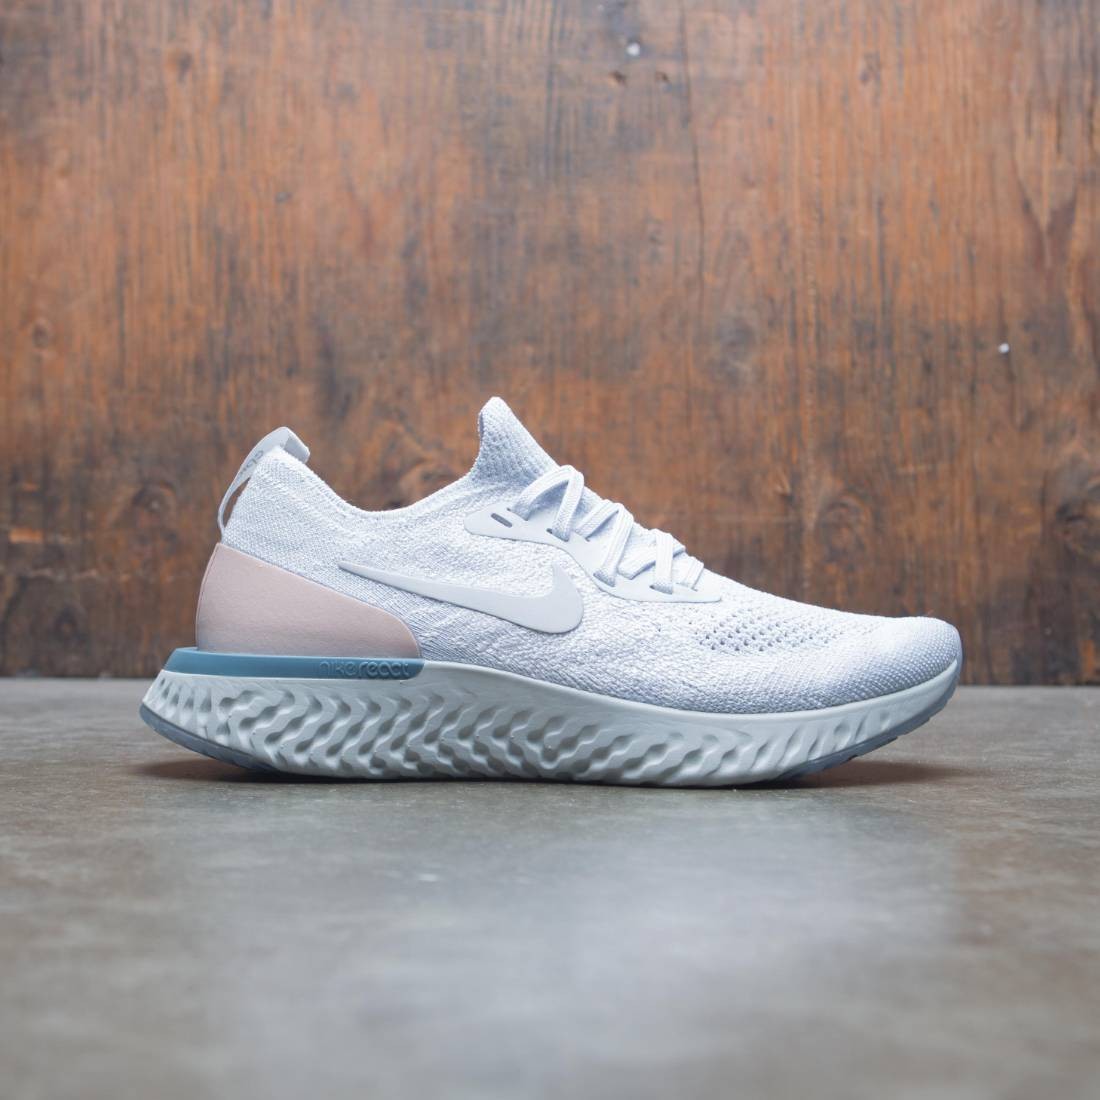 Running Women Nike Epic React Flyknit Sports Shoes at best price in Surat